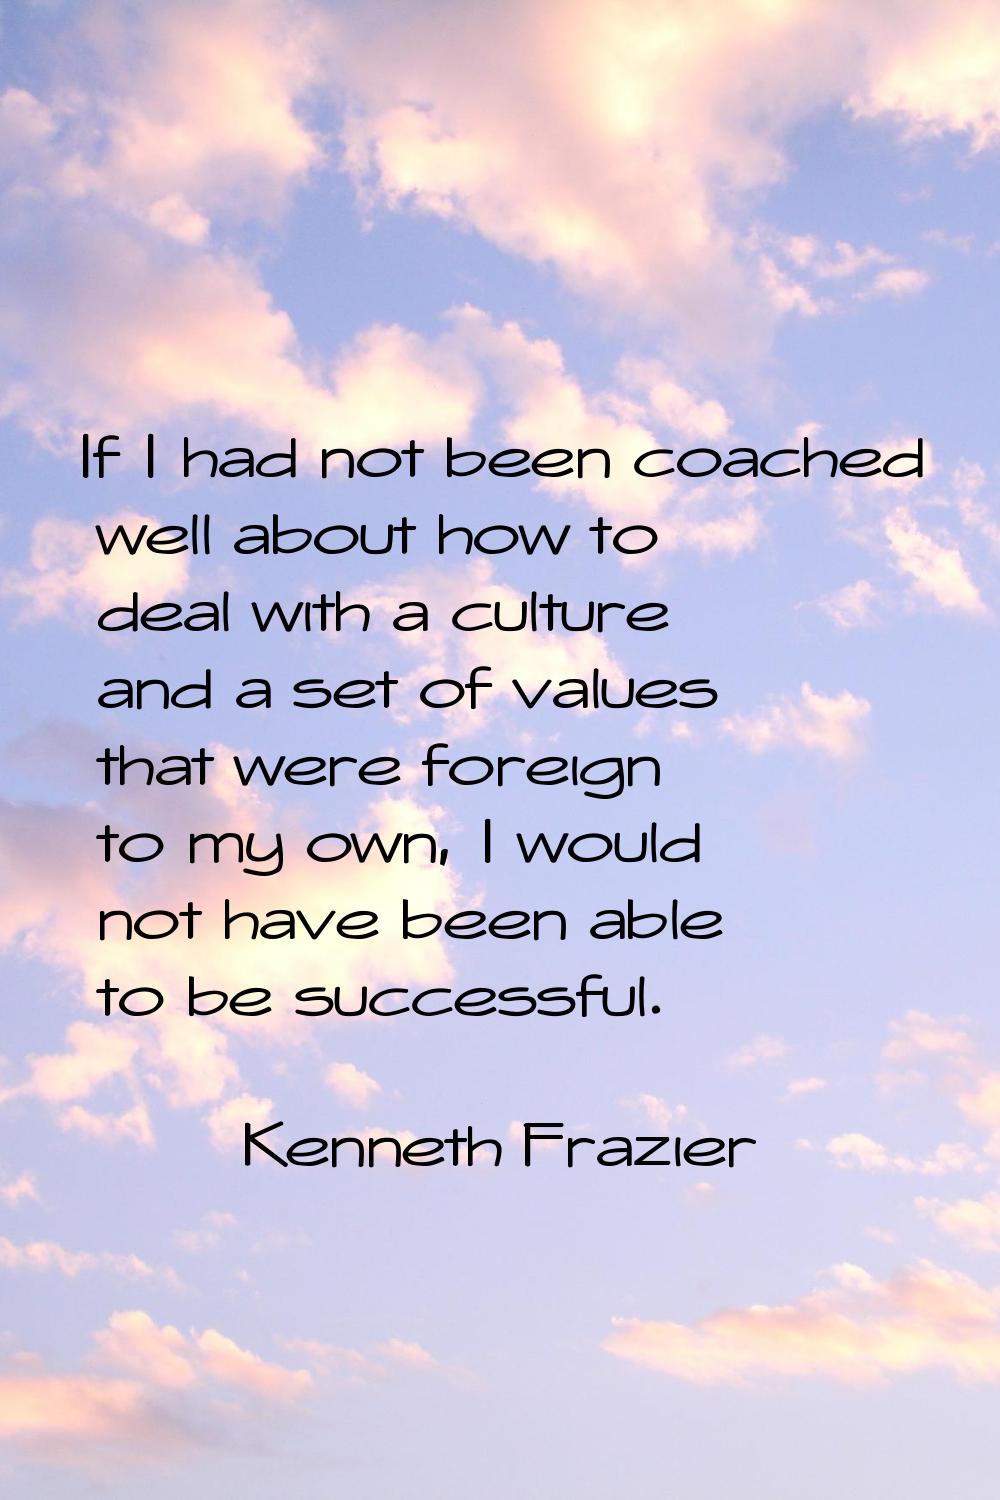 If I had not been coached well about how to deal with a culture and a set of values that were forei